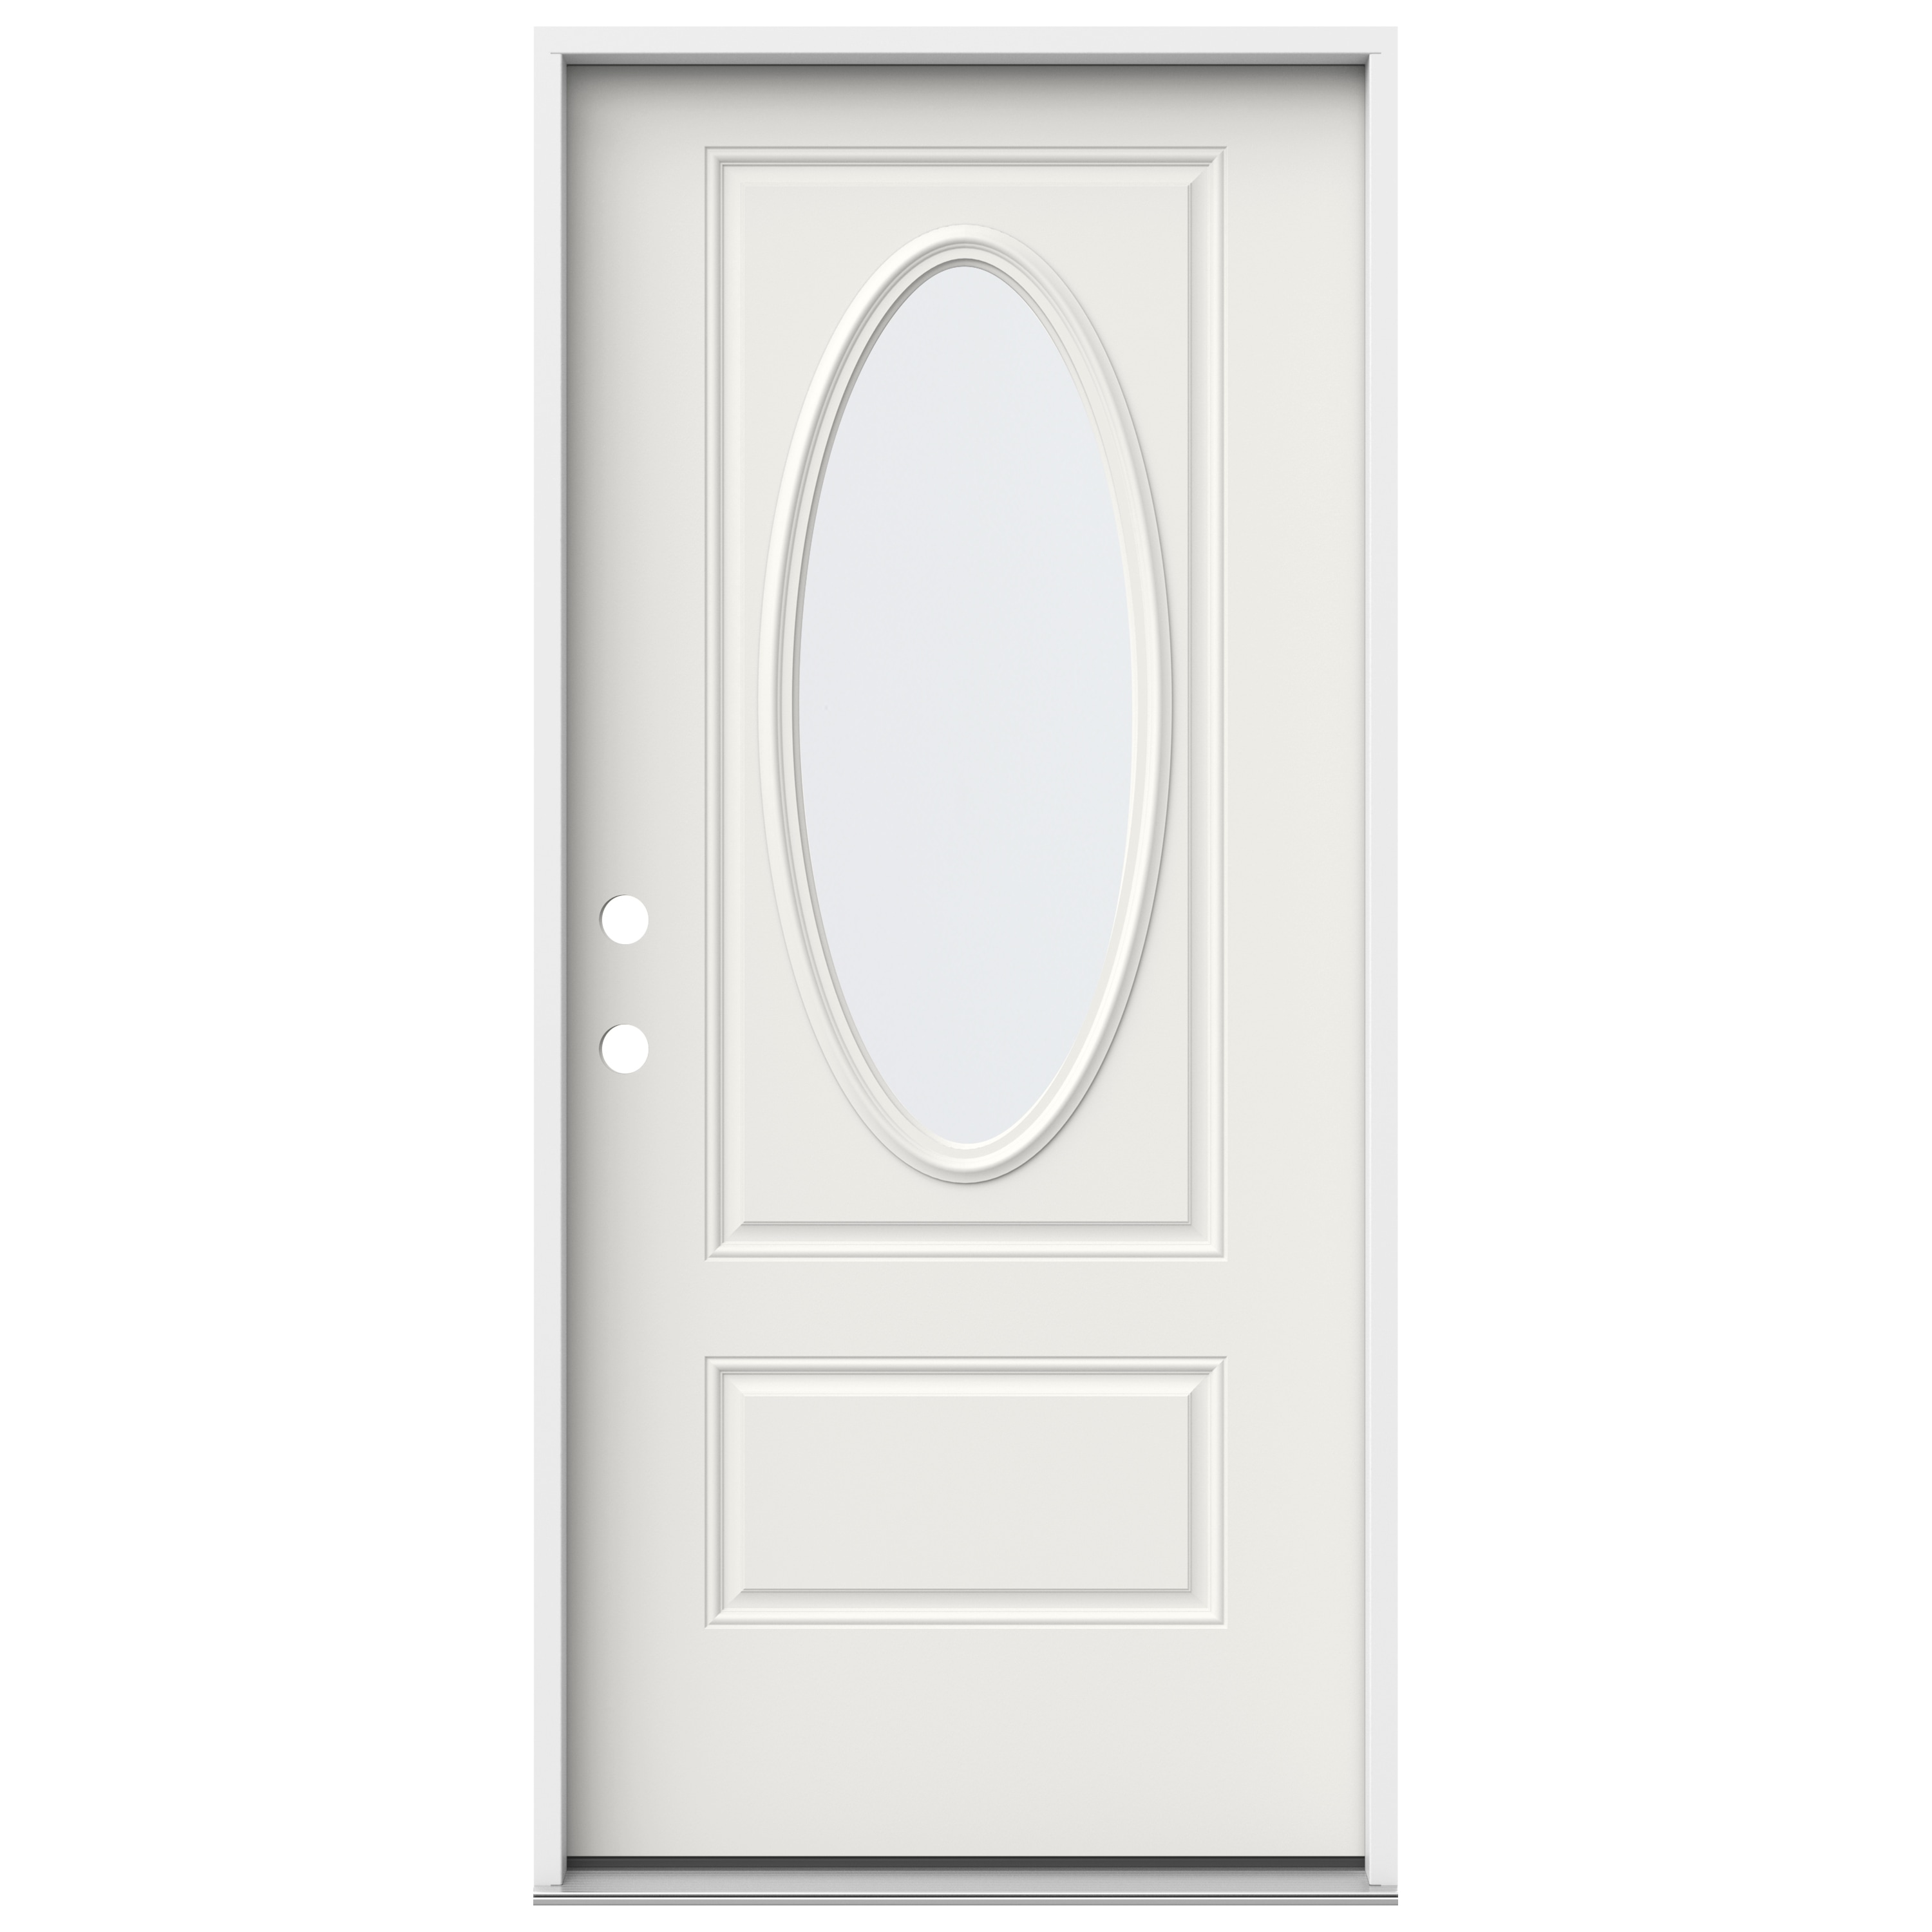 66.5 inch x 82.375 inch Blacksmith Full Oval Lite Prefinished White  Right-Hand Inswing Steel Prehung Front Door with Sidelites and Brickmould